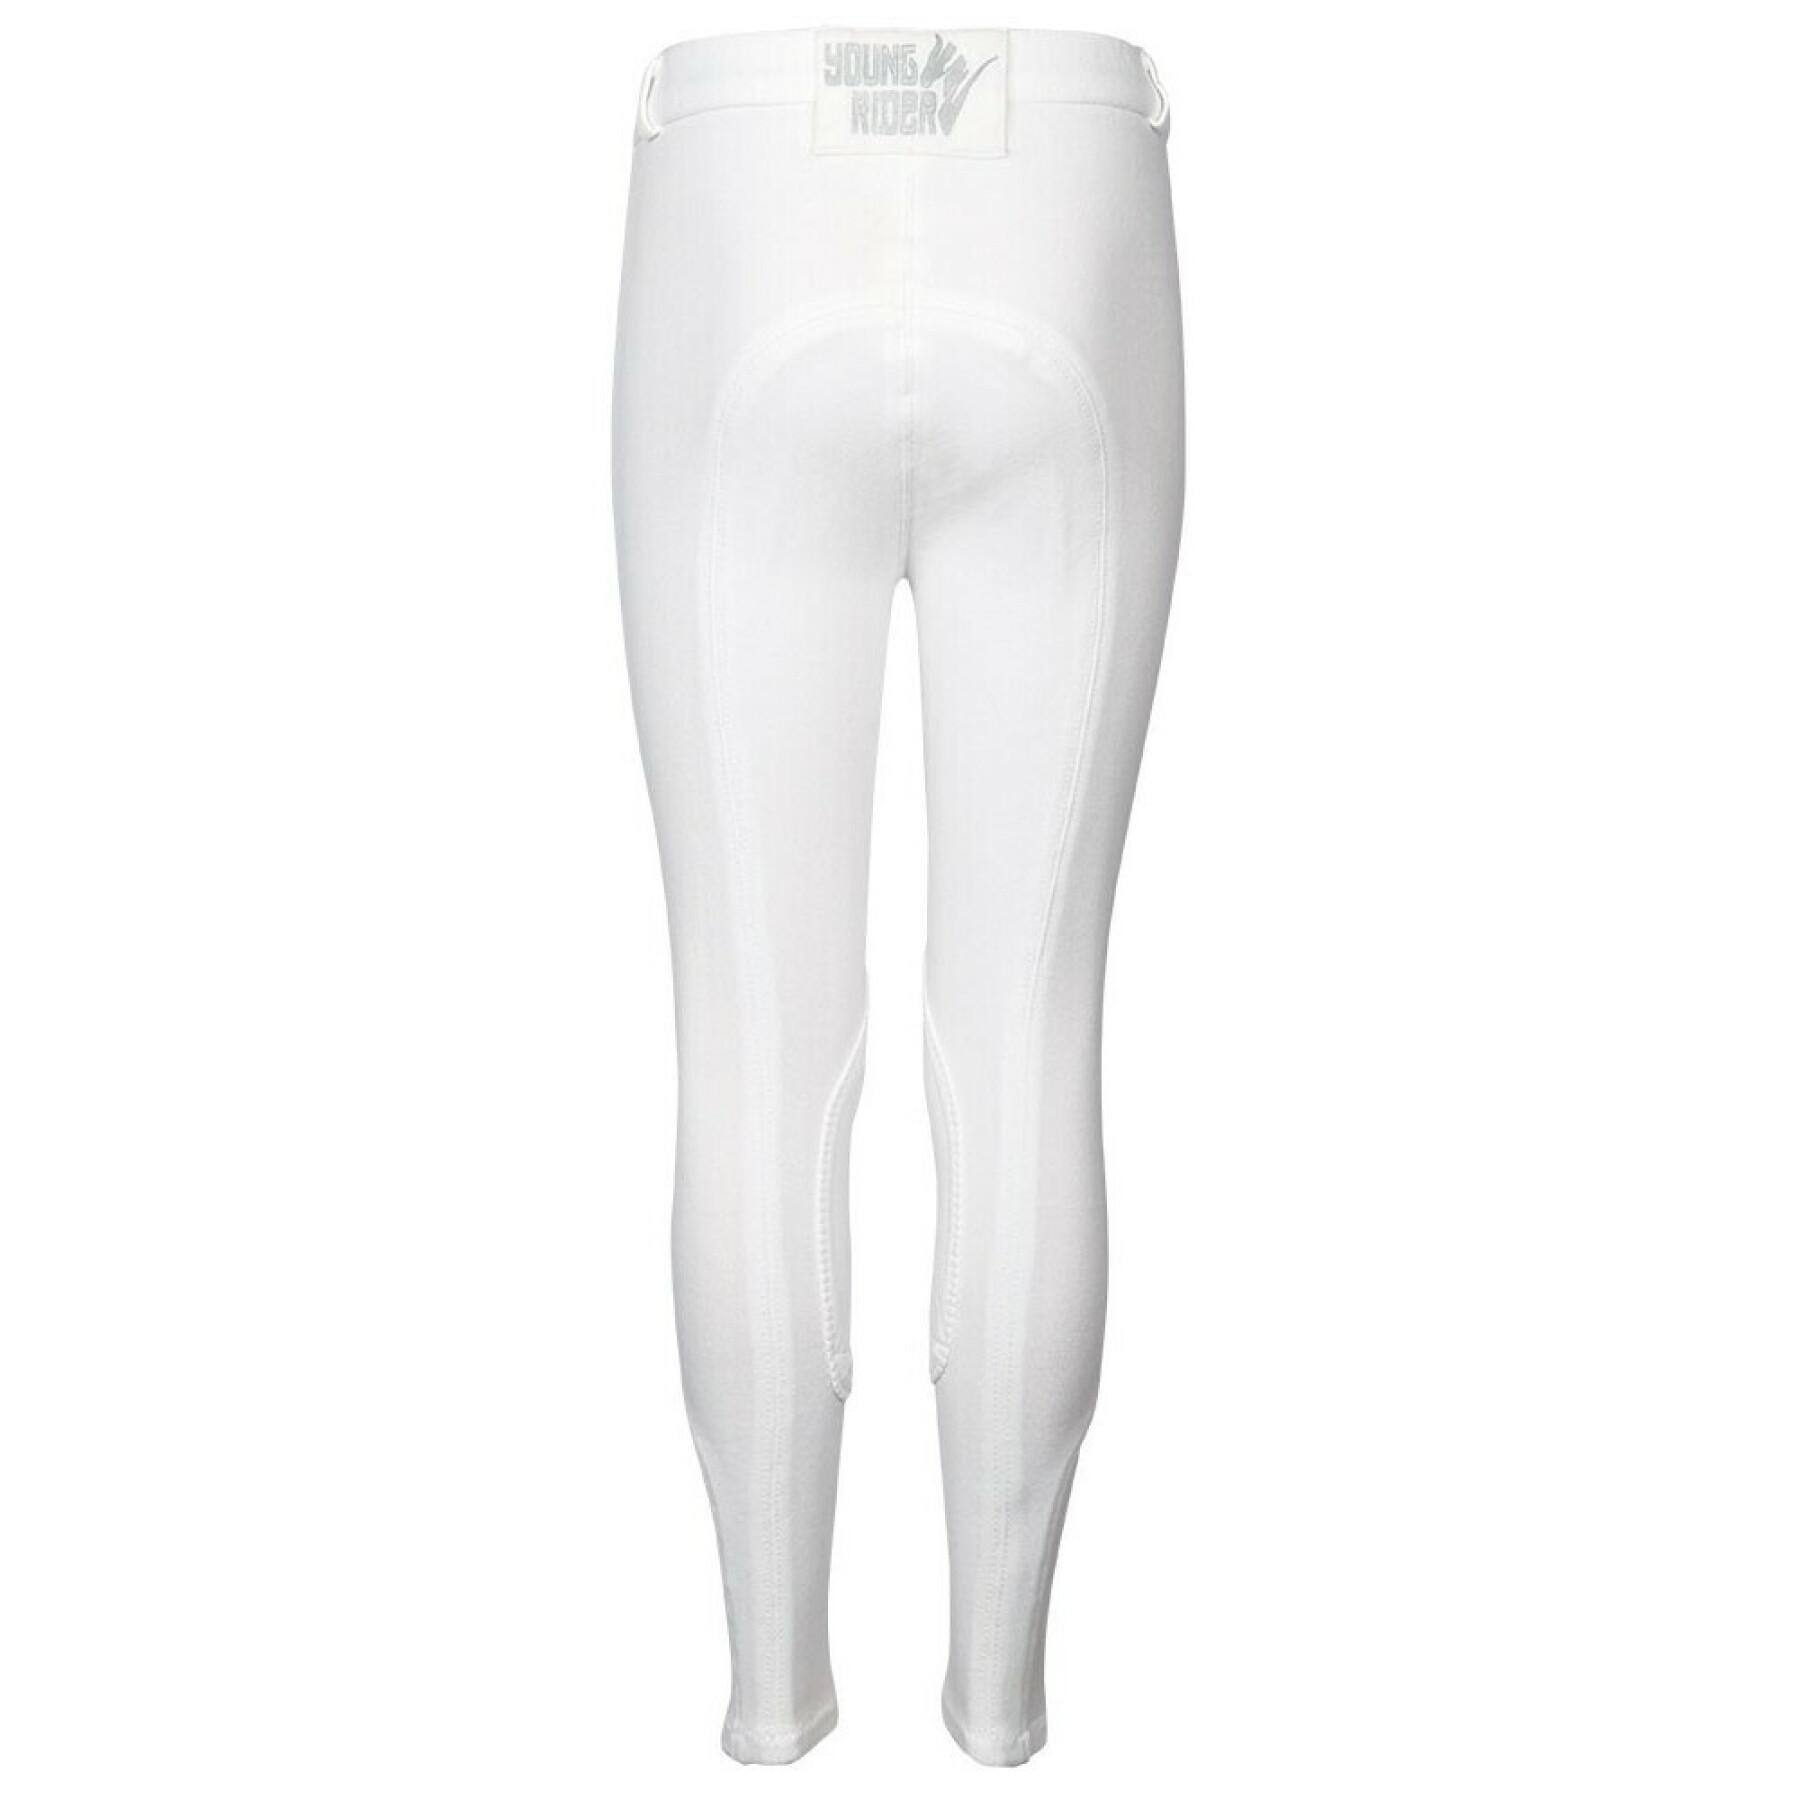 Women's competition riding pants Harry's Horse Youngrider